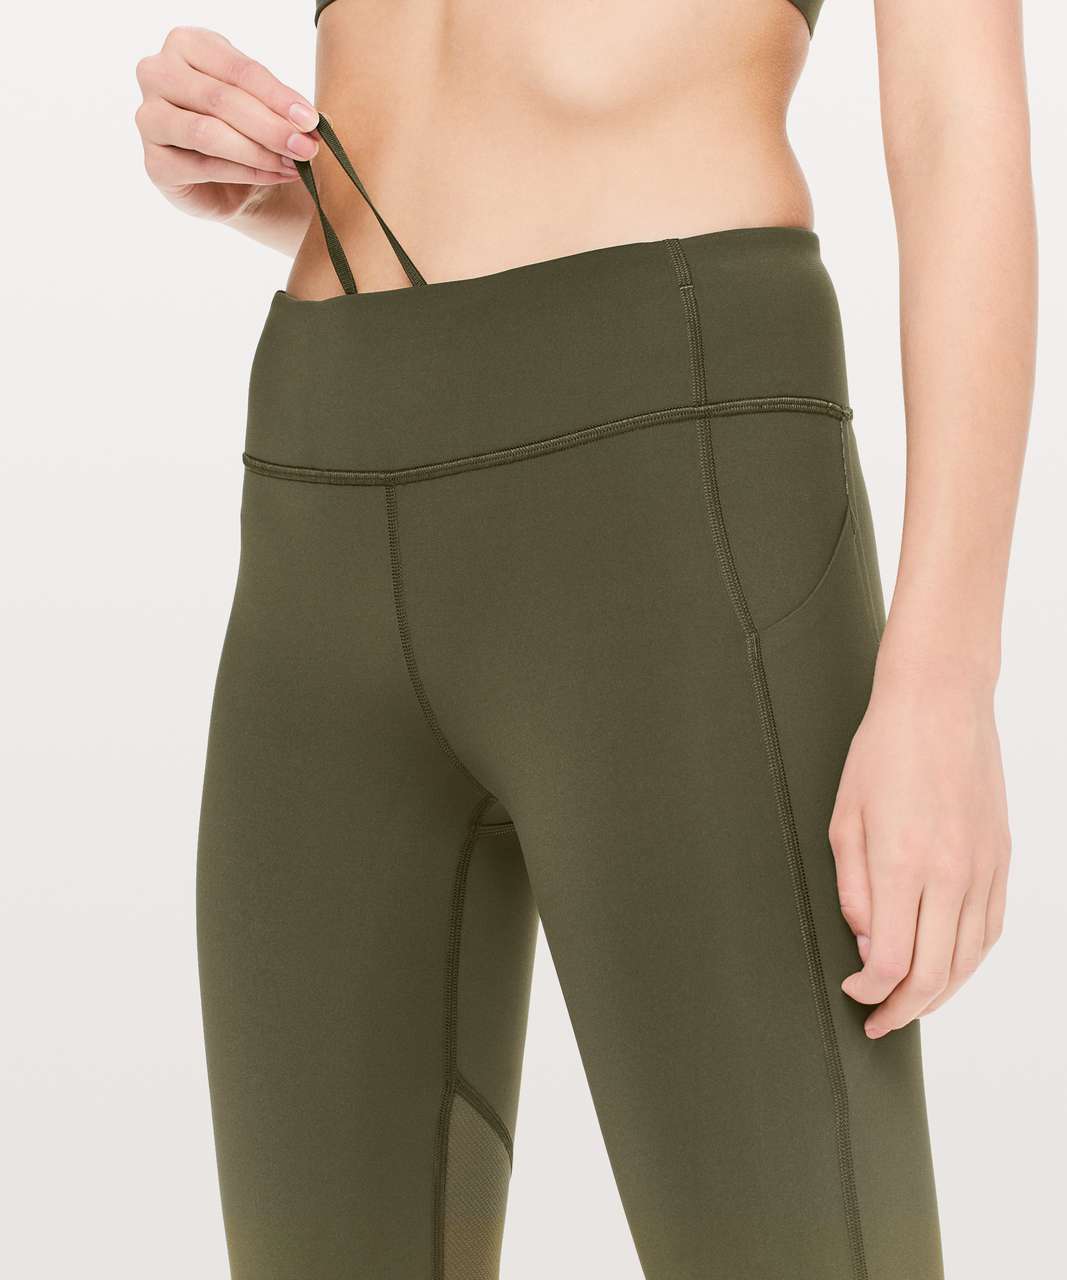 Lululemon Pace Rival Mid-rise Crop 22” In Dark Olive